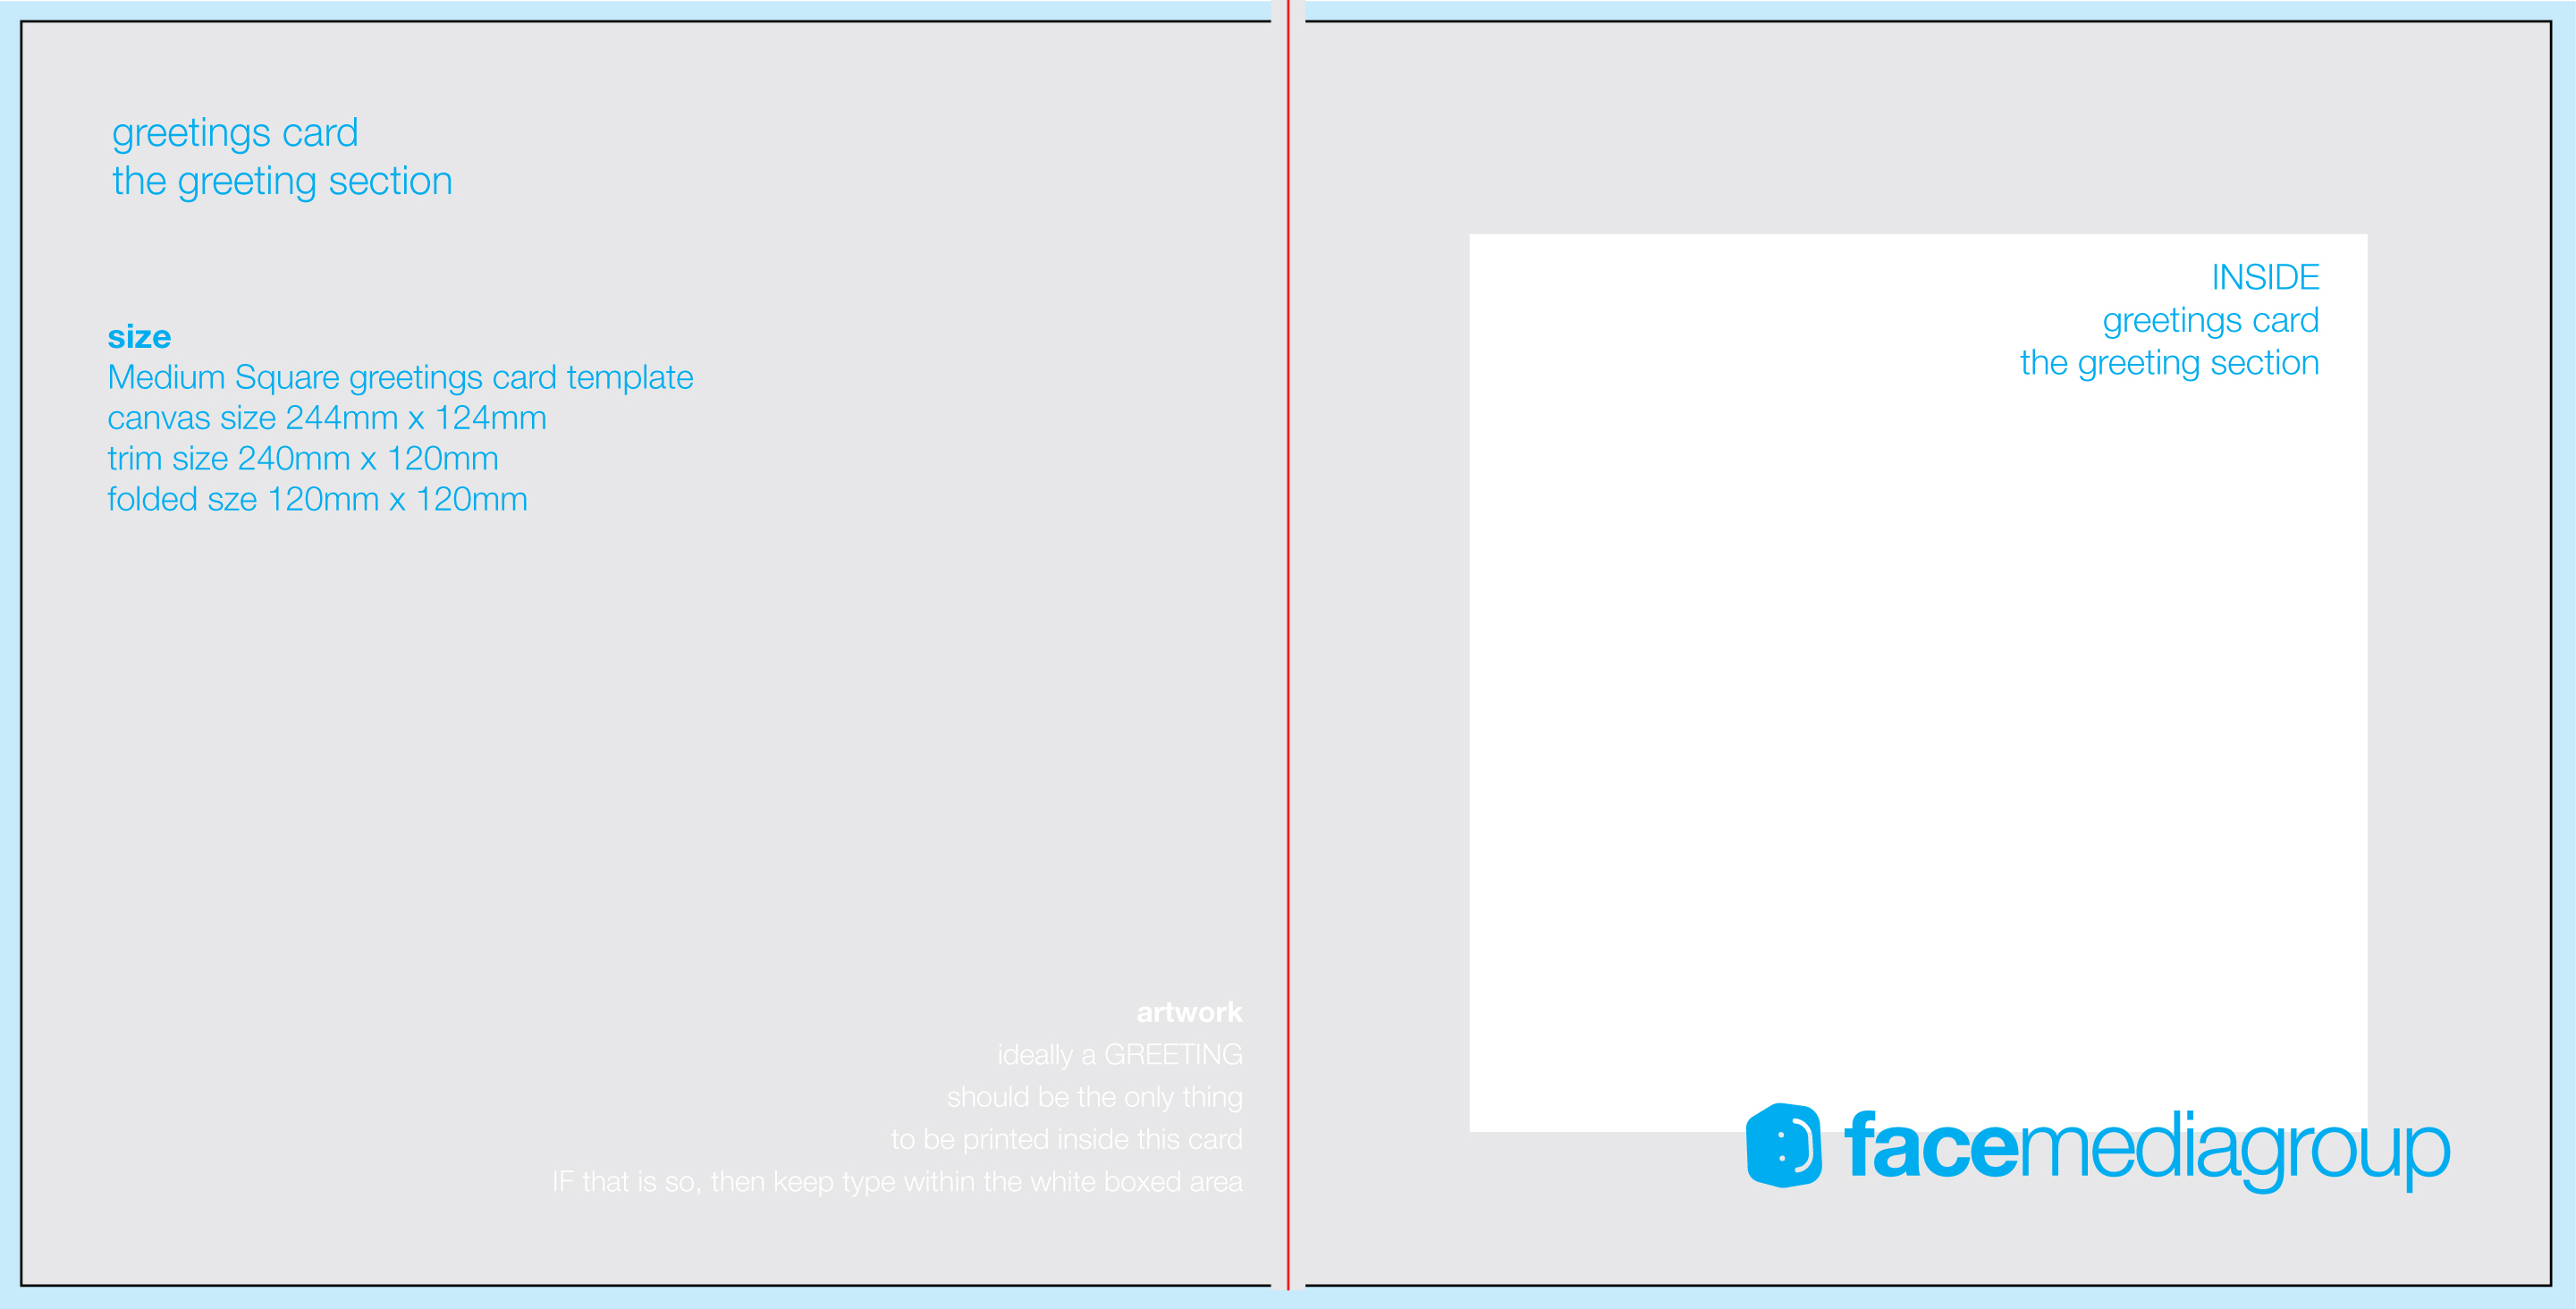 Free Blank Greetings Card Artwork Templates For Download | Face - Free Printable Blank Greeting Card Templates